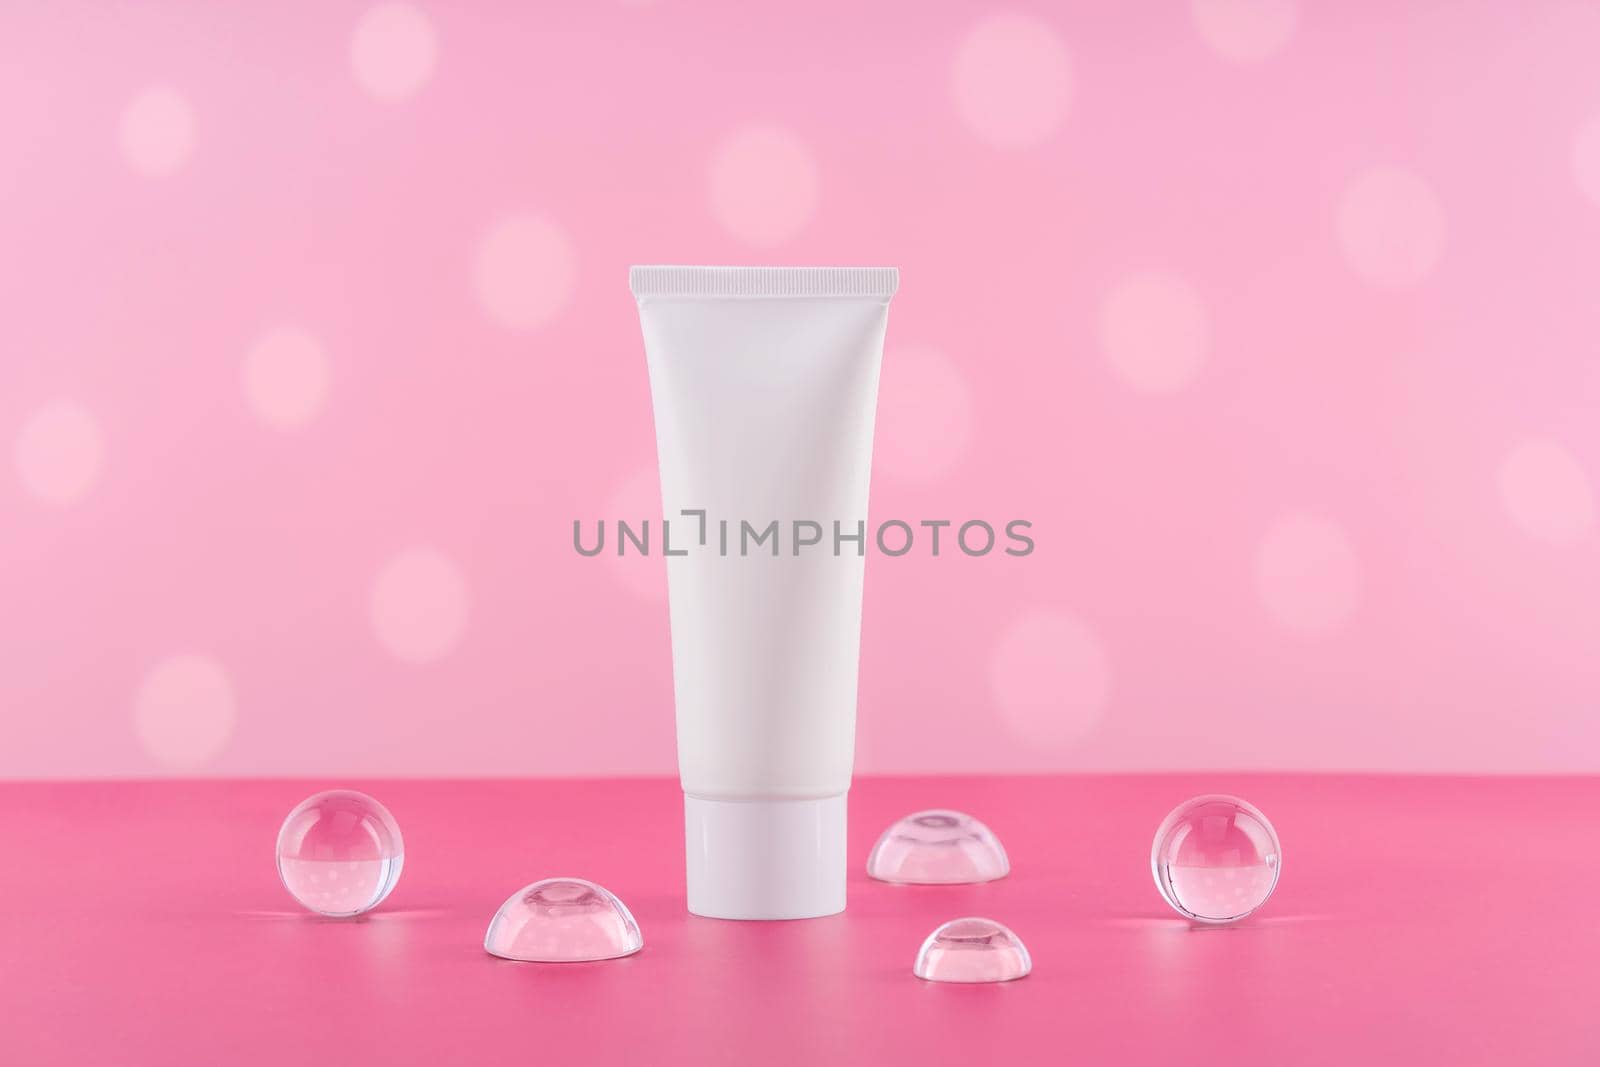 Unbranded cosmetic cream white plastic tube mockup on pink background. Blank body and health care beauty product packaging. Moisturising hand creme bottle with stylish props. by photolime